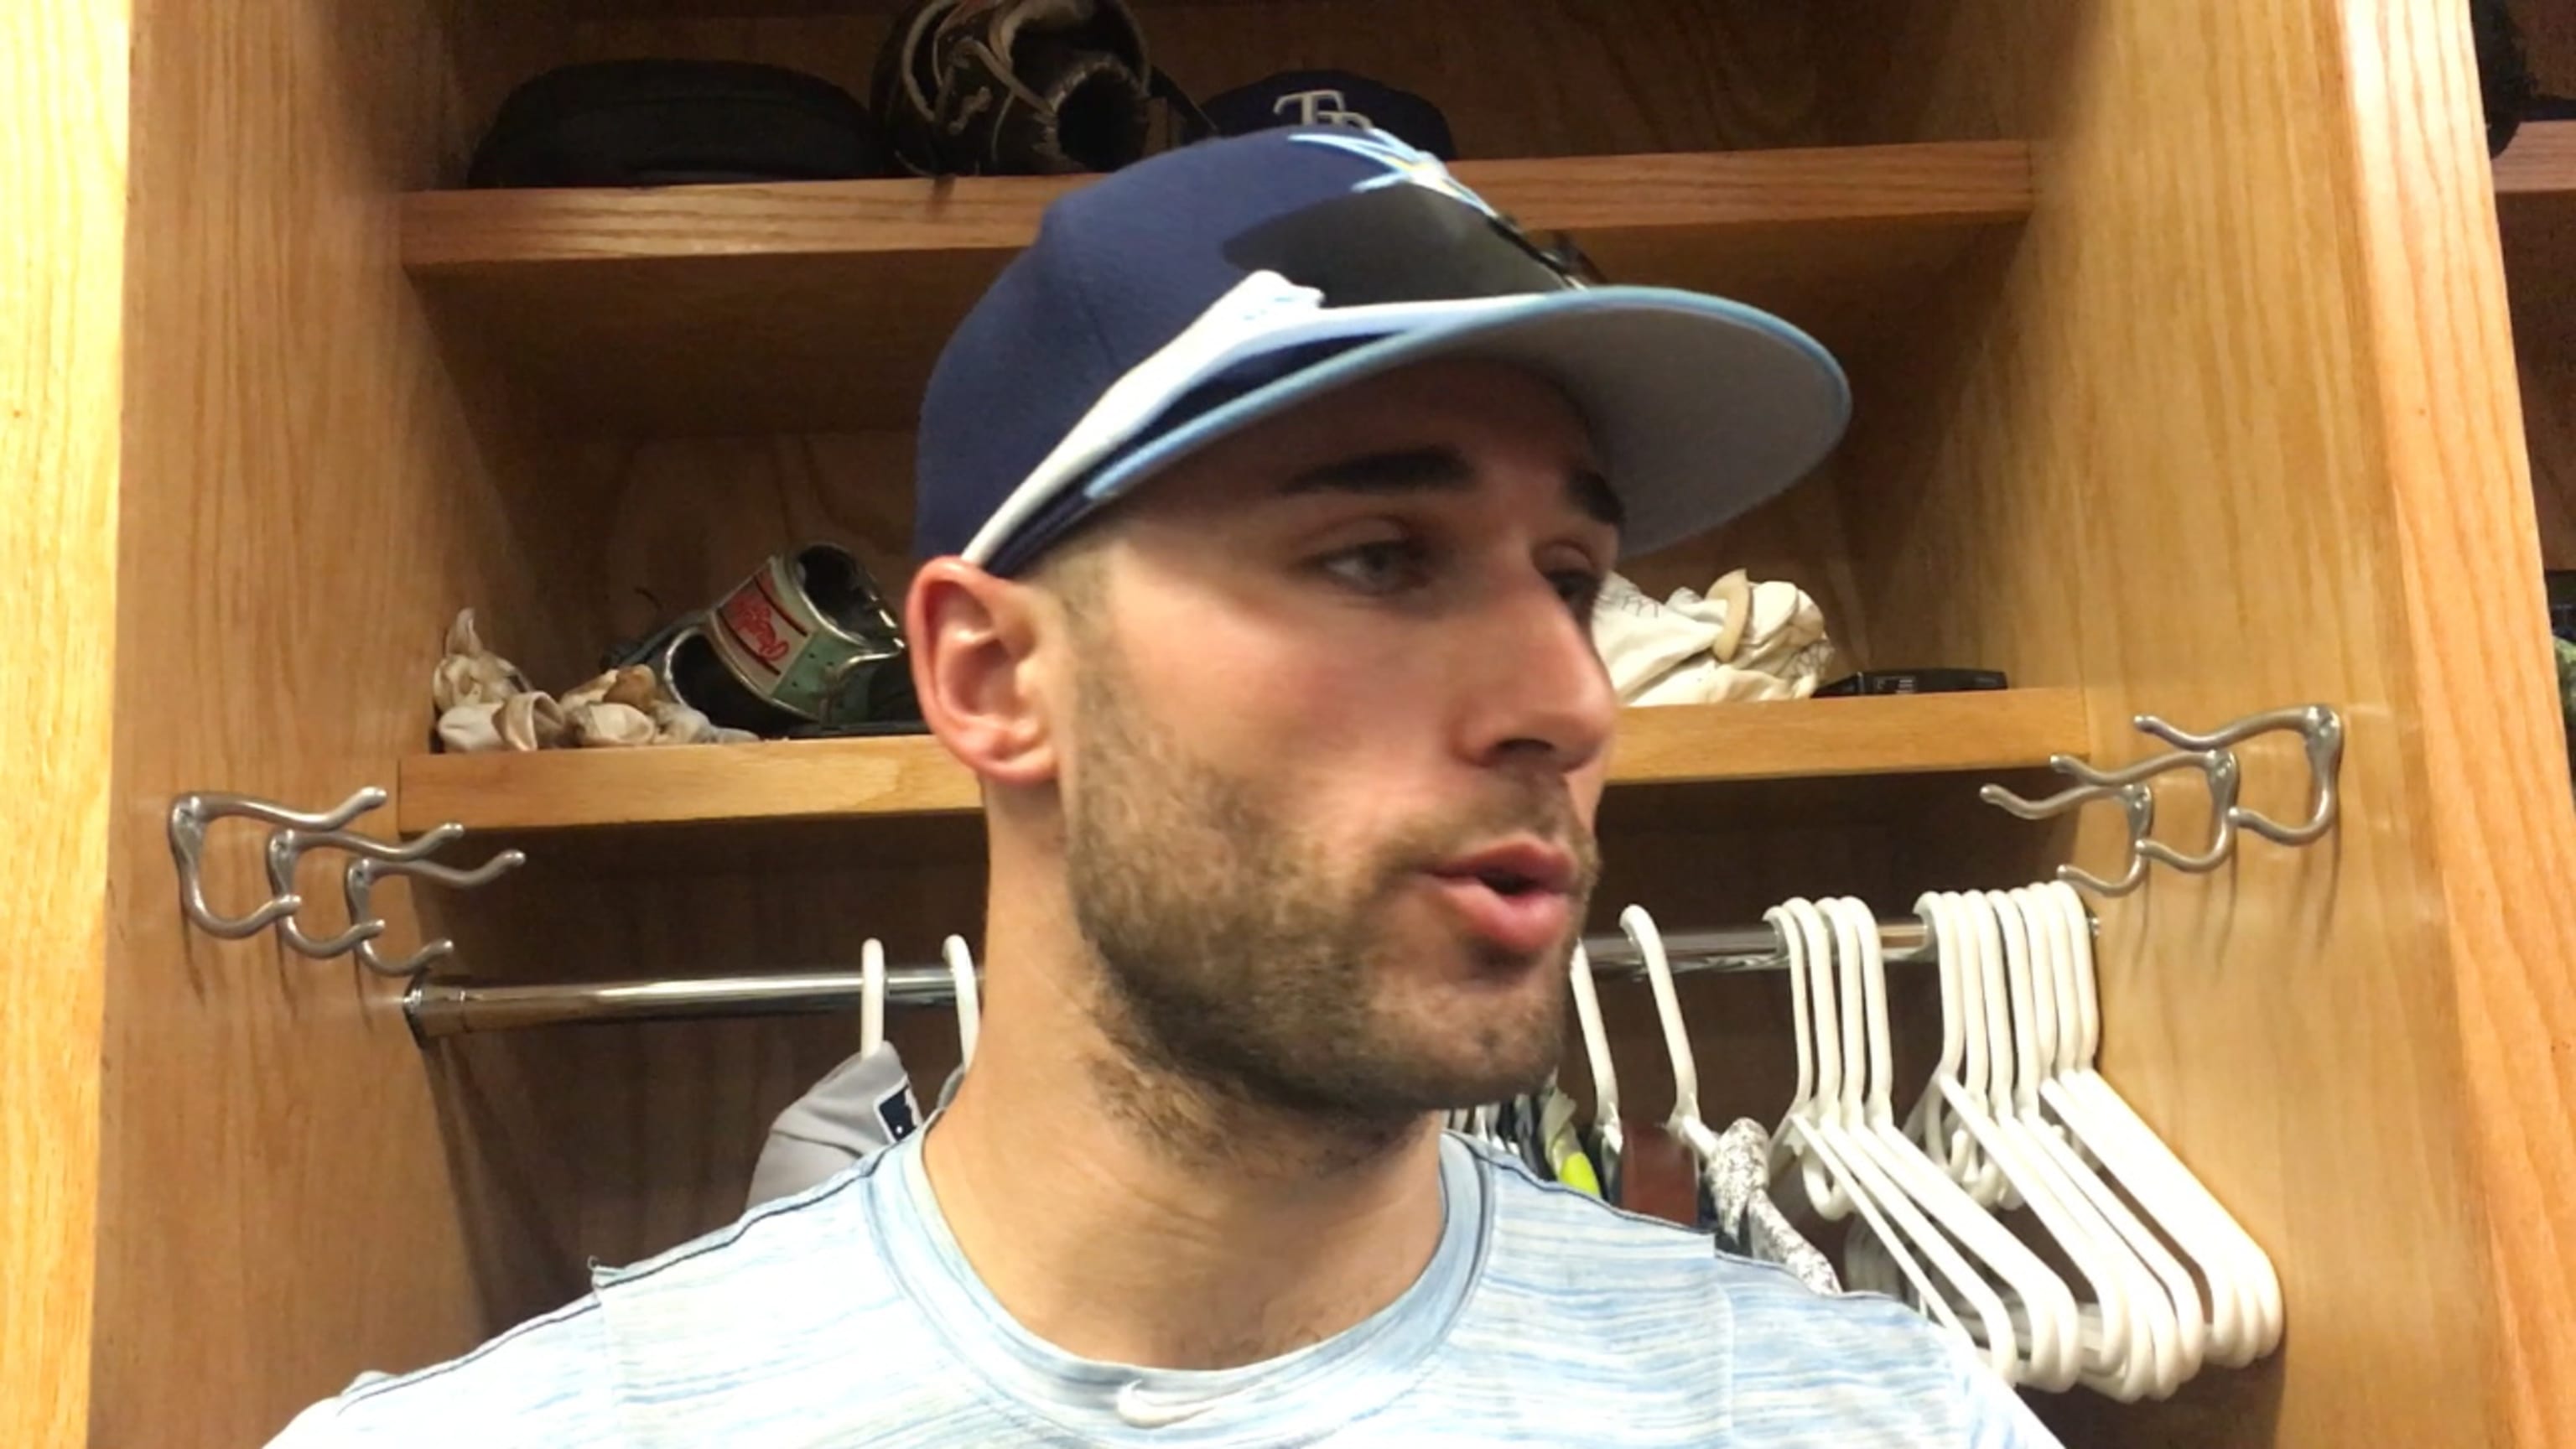 Kevin Kiermaier is Rays nominee for MLB Roberto Clemente award